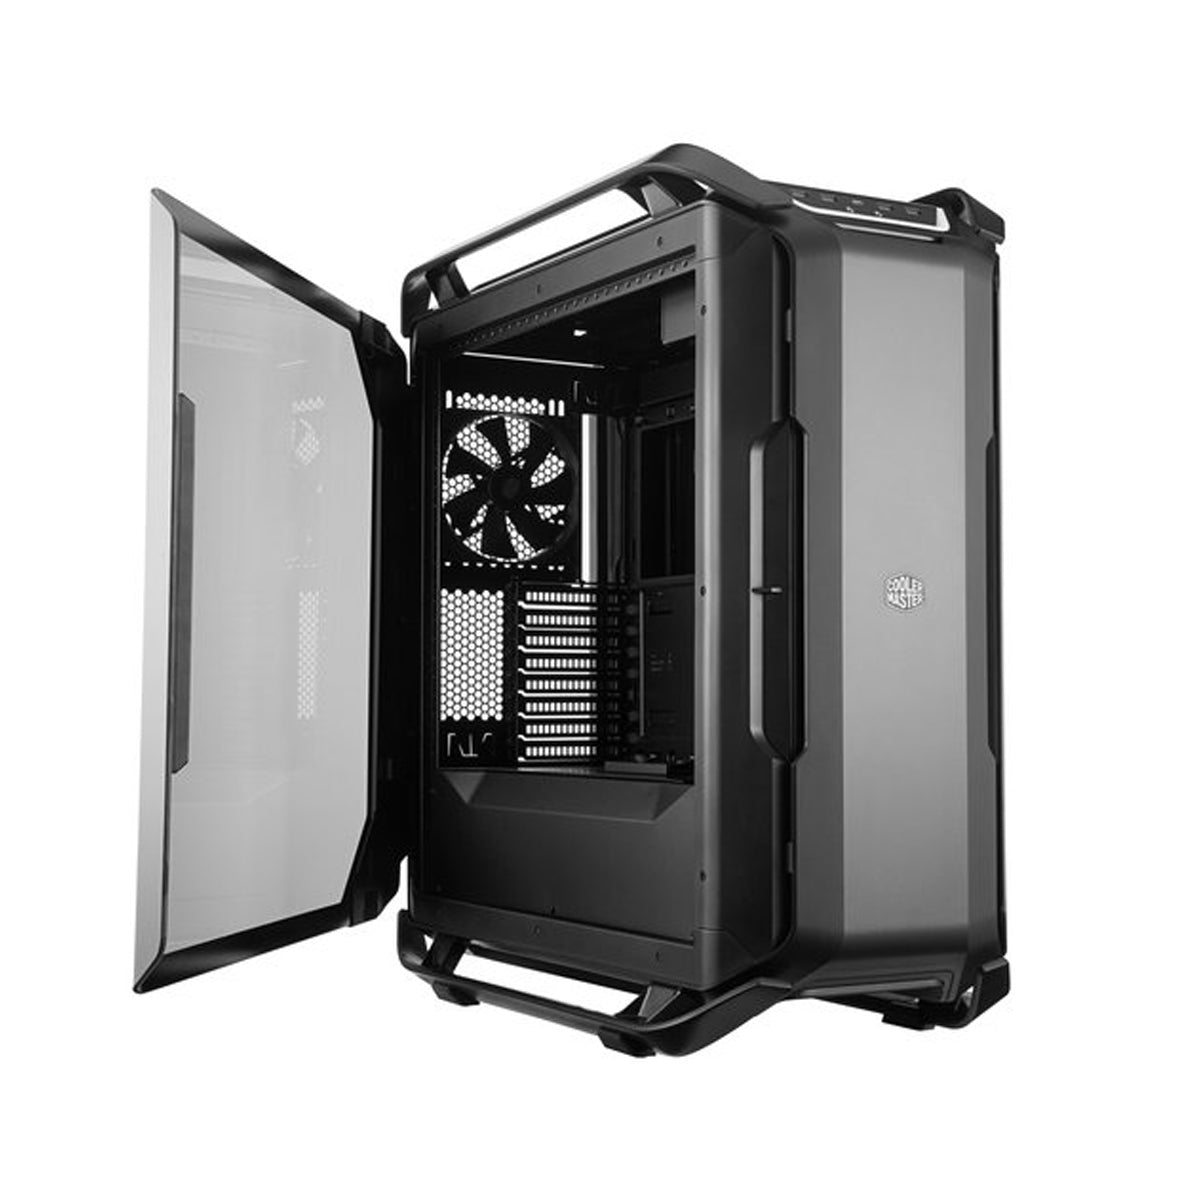 Cooler Master - Intel Core i7 - 2TB M.2 SSD - RTX 3080 - Waterkoeling - GamePC.BCM100109 - WiFi